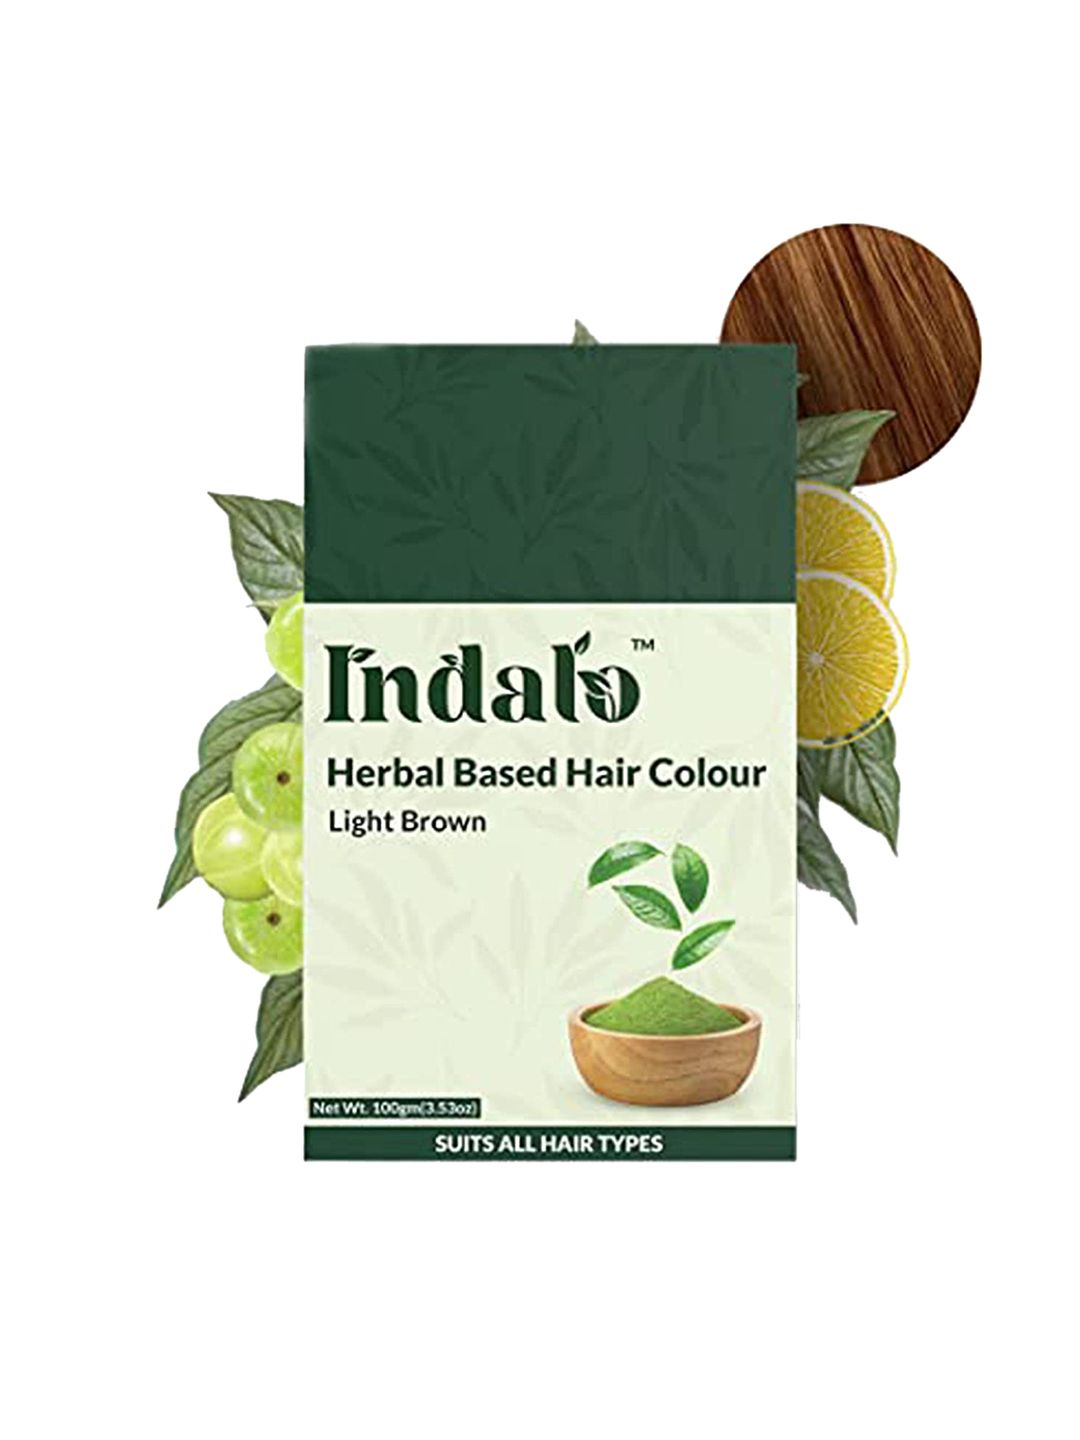 INDALO Long Lasting Herbal Based Hair Colour with Amla and Brahmi 100 g - Light Brown Price in India